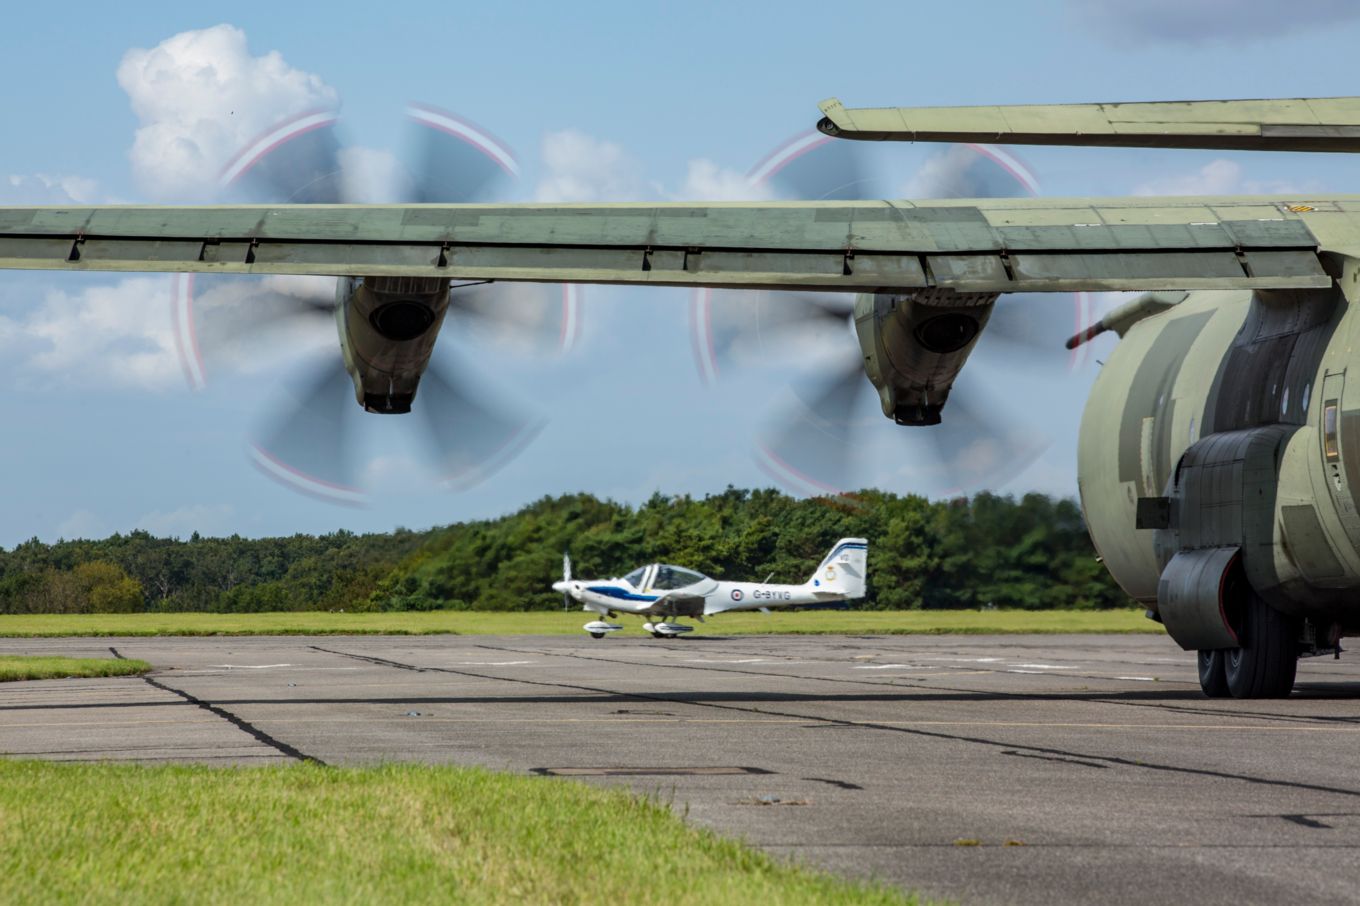 An RAF Hercules and Grob Tutor on the airfield at RAF Wittering